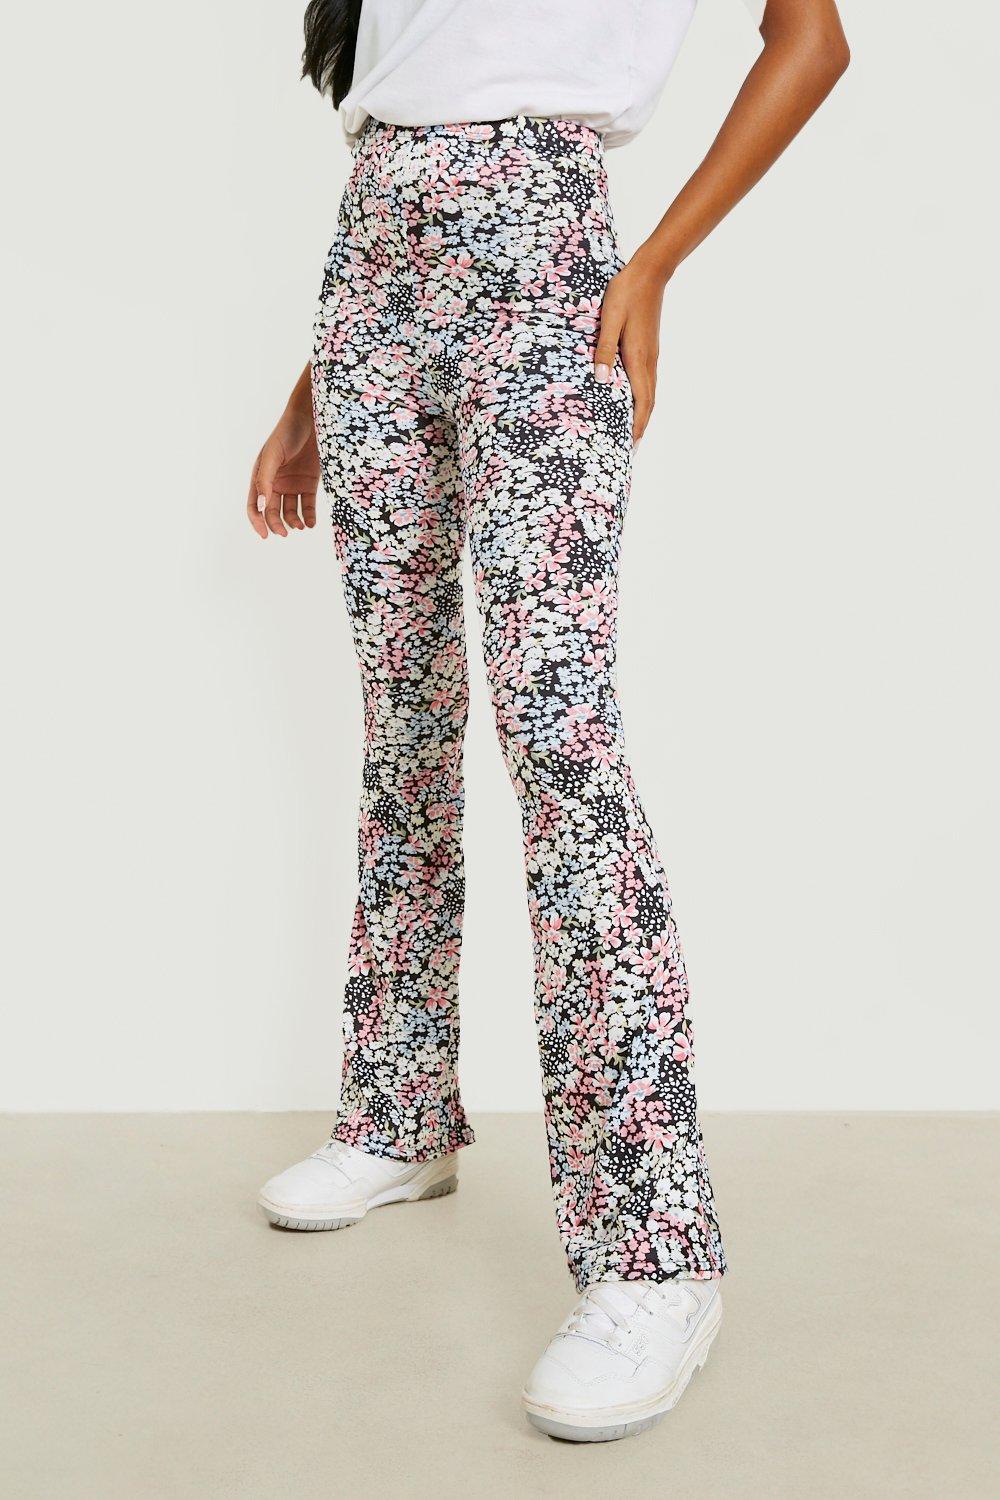 Women's Tall Ditsy Floral Print Flare